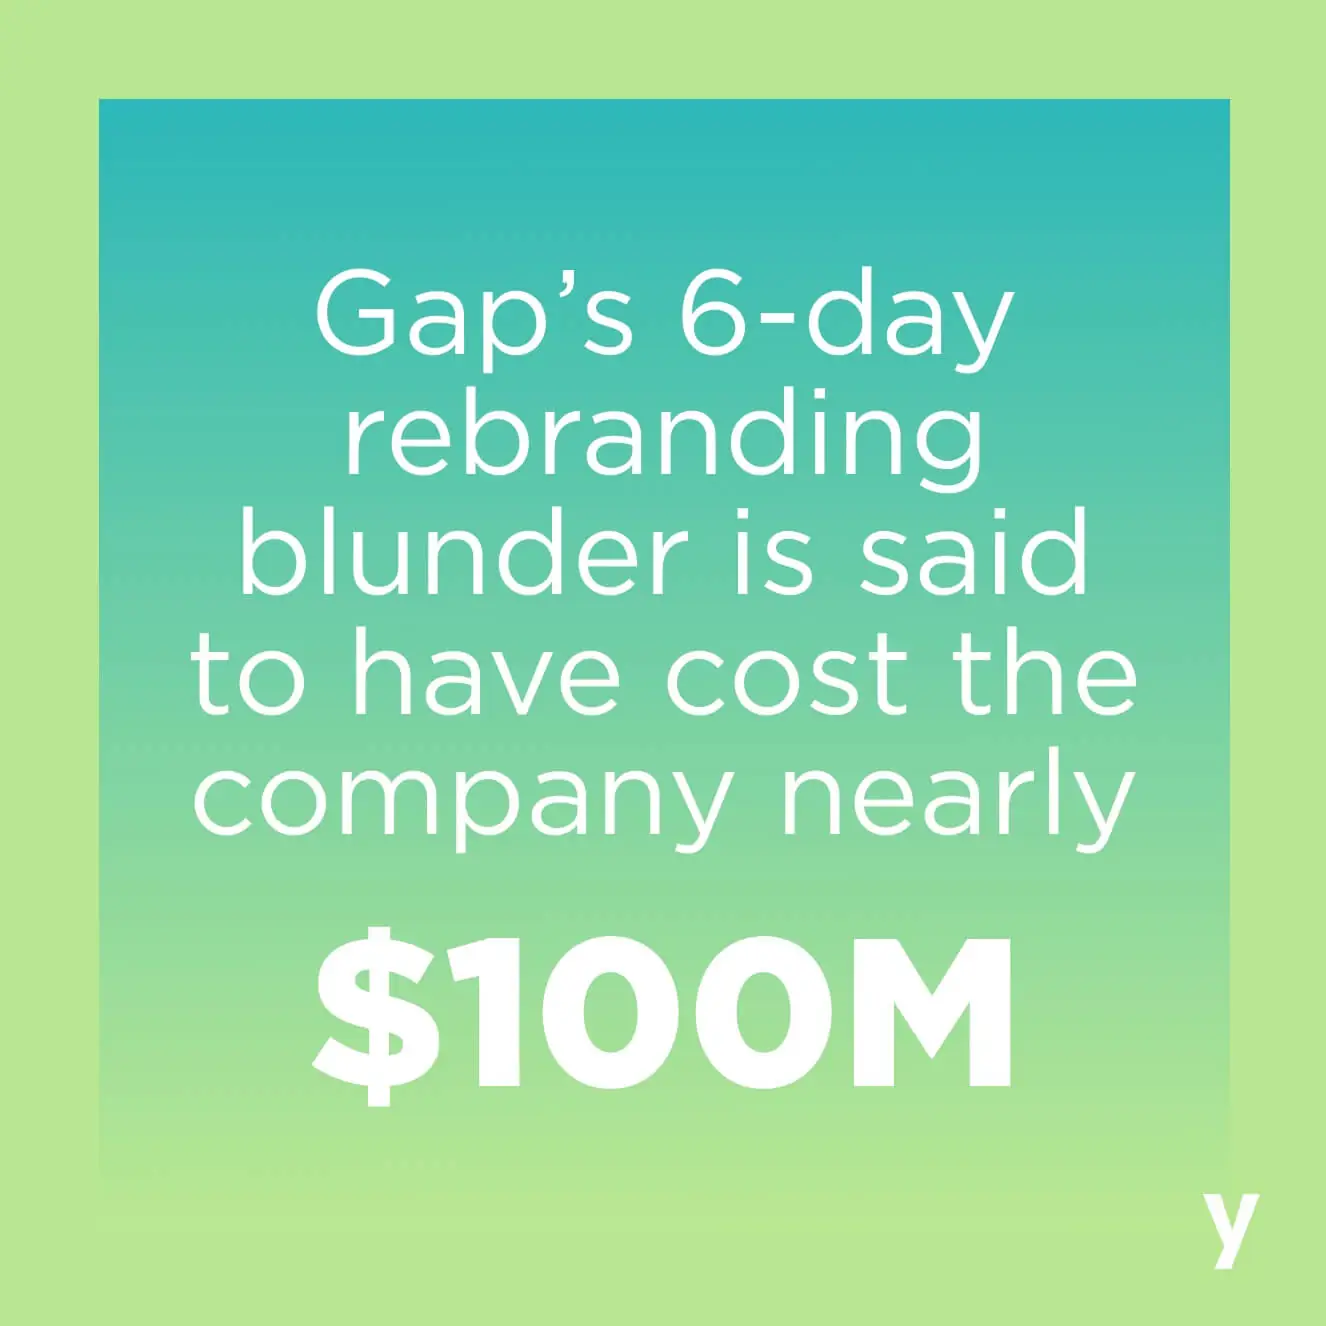 Gap's 6-day rebranding blurb is said to have cost the company near $ 100 000.